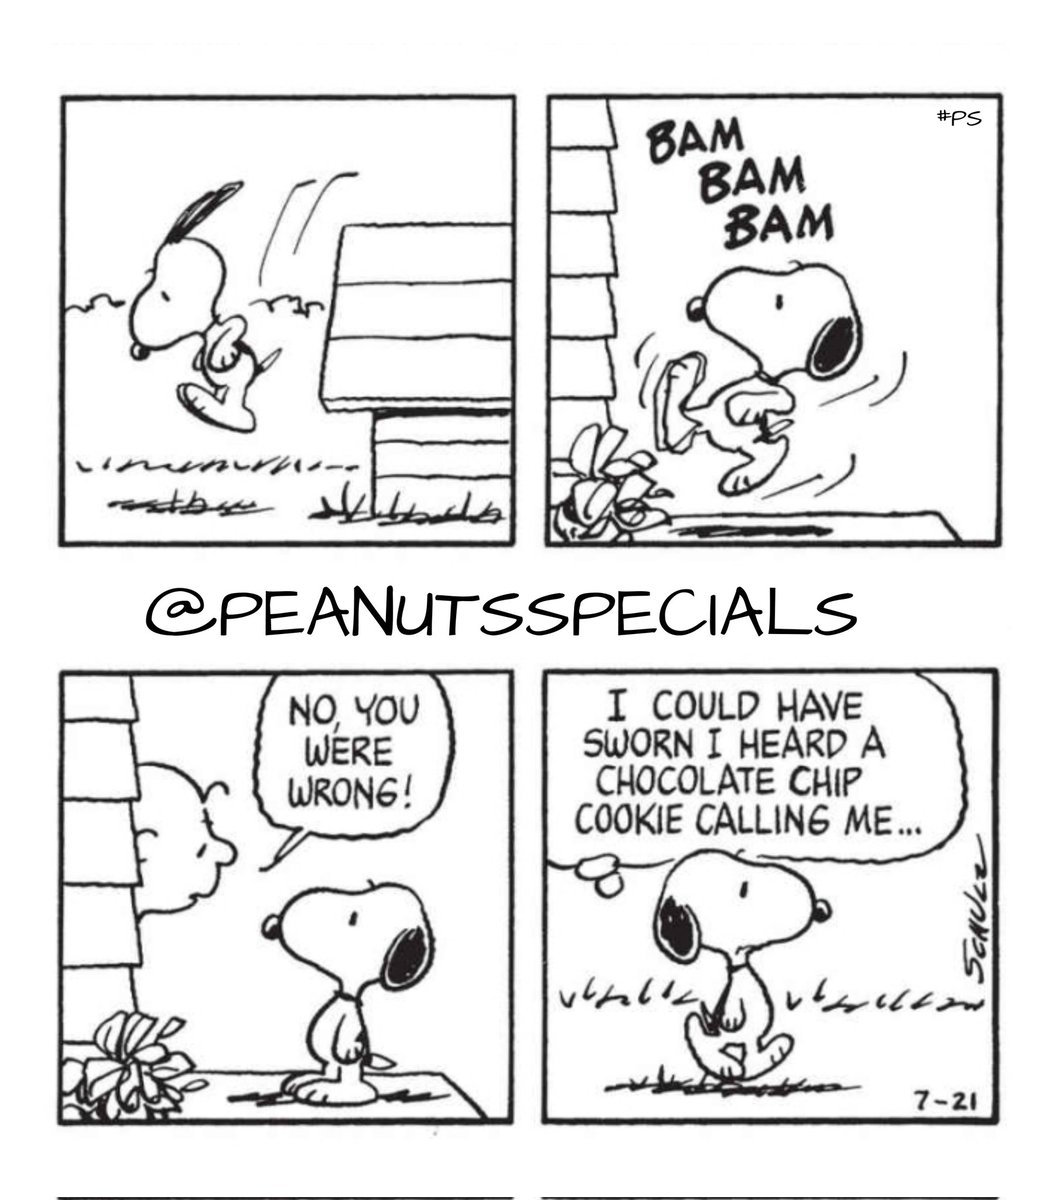 First Appearance: July 21, 1982
#snoopy #charliebrown #bambambam #no #wrong #icould #sworn #iheard #chocolatechipcookie #calling #me #peanutswednesday #peanutshome #schultz #ps #pnts #peanuts #peanutsspecials